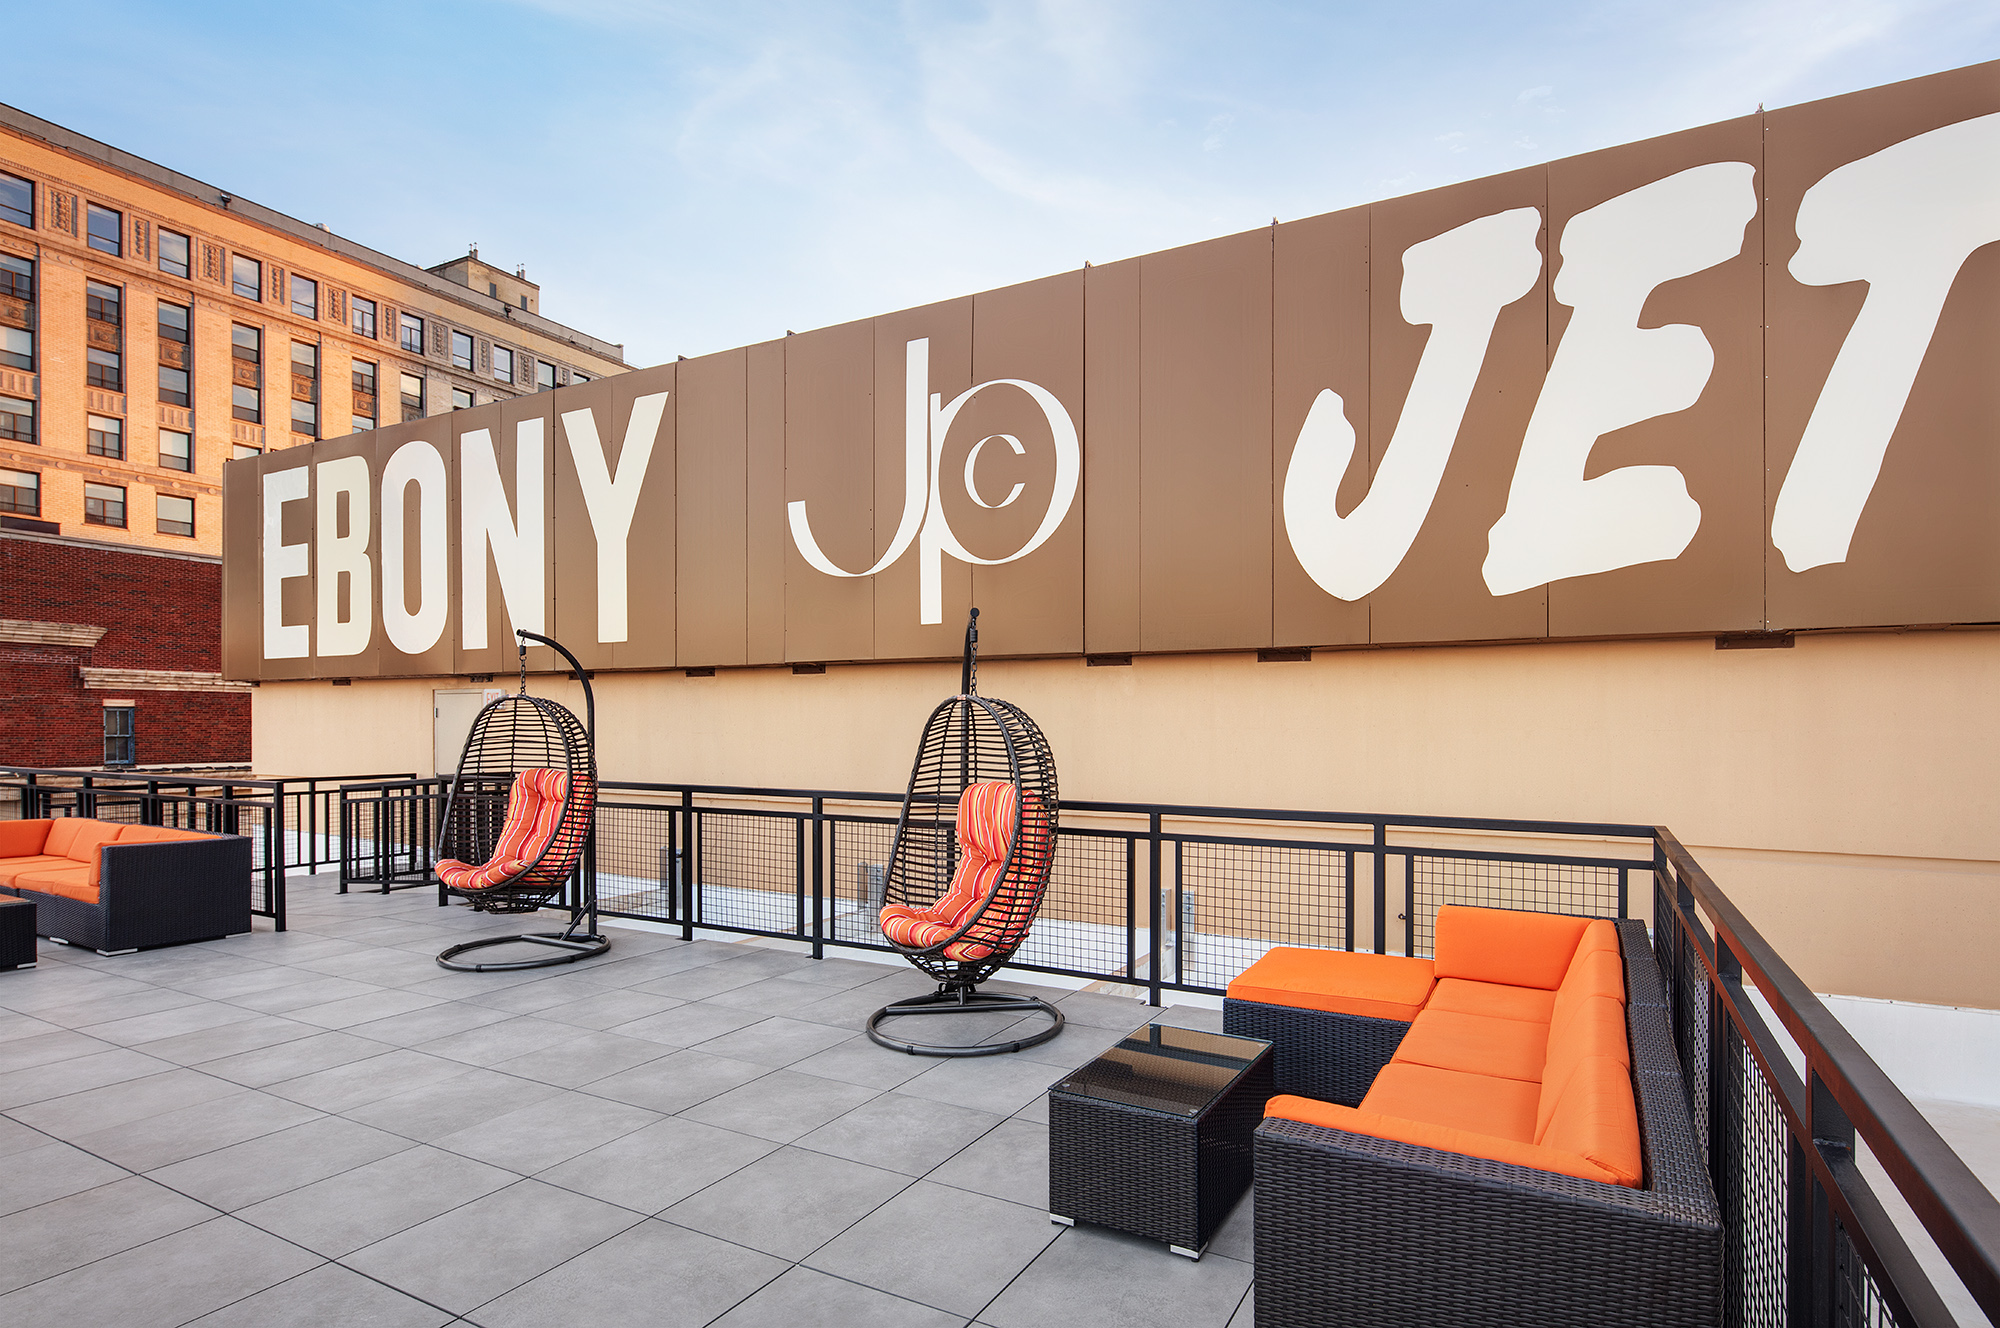 A rooftop with two swinging chairs and a few lounge couches sit in front of a large brown and white sign that displays the historic “Ebony, JPC, Jet” text.